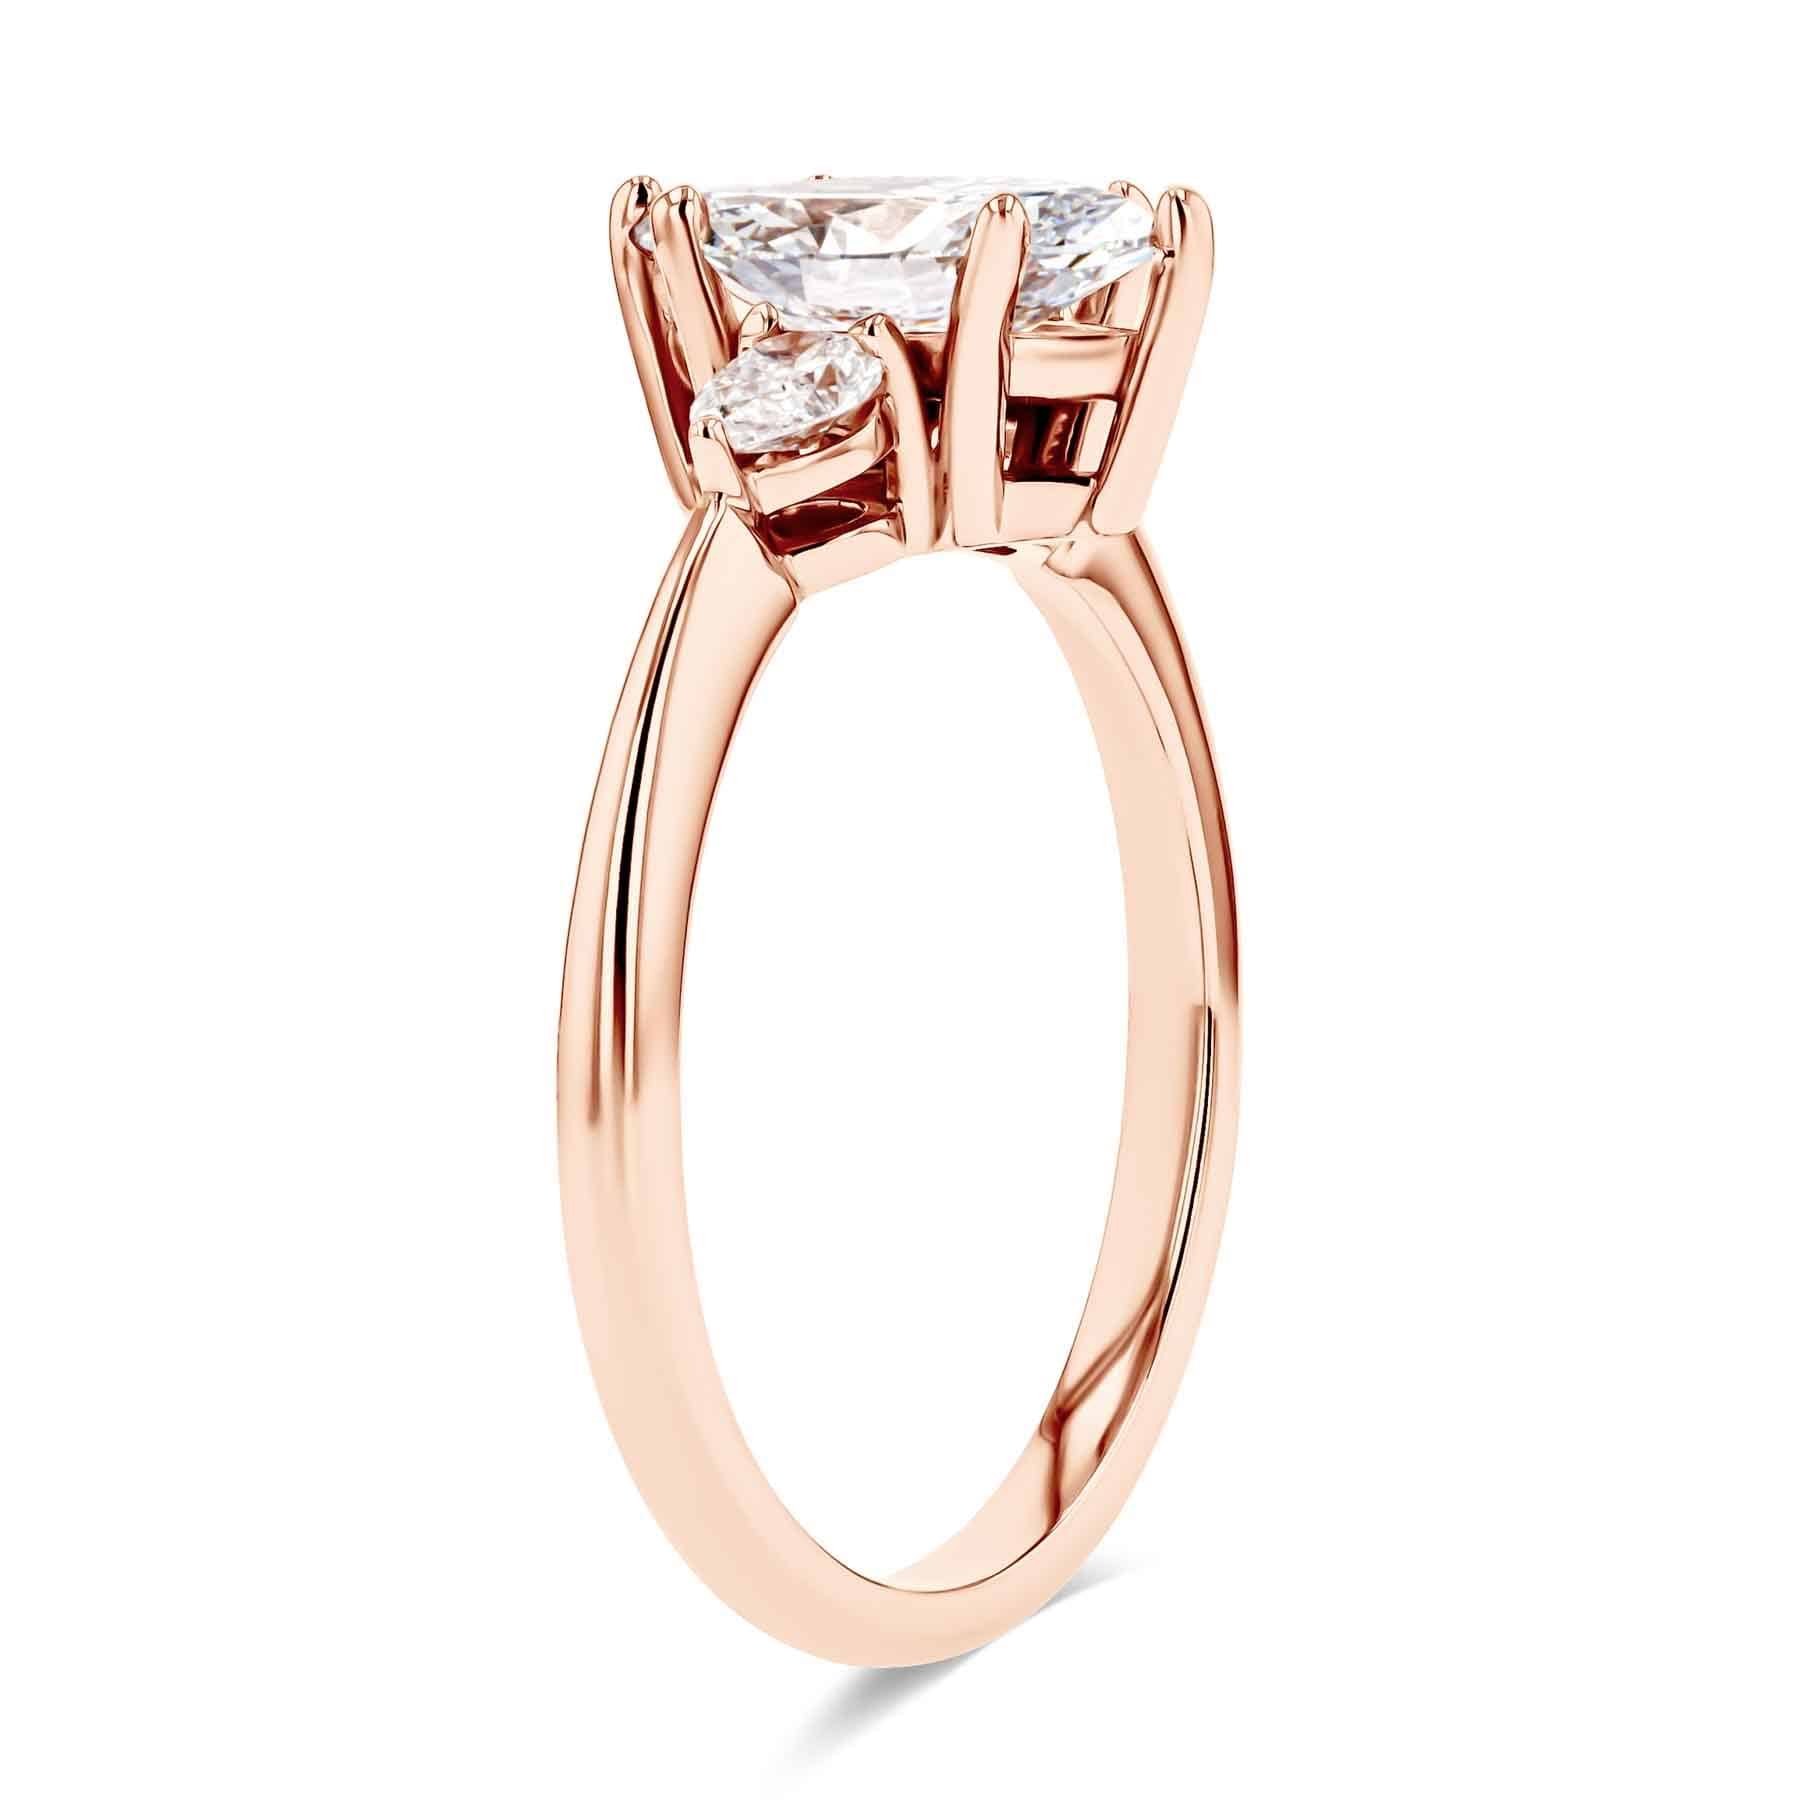 Flourish Three Stone Engagement Ring with a 1.15ct Lab-Grown Diamond center stone set in 14K Rose Gold|three stone engagement ring with marquise shape lab grown diamond center stone in 14k rose gold 